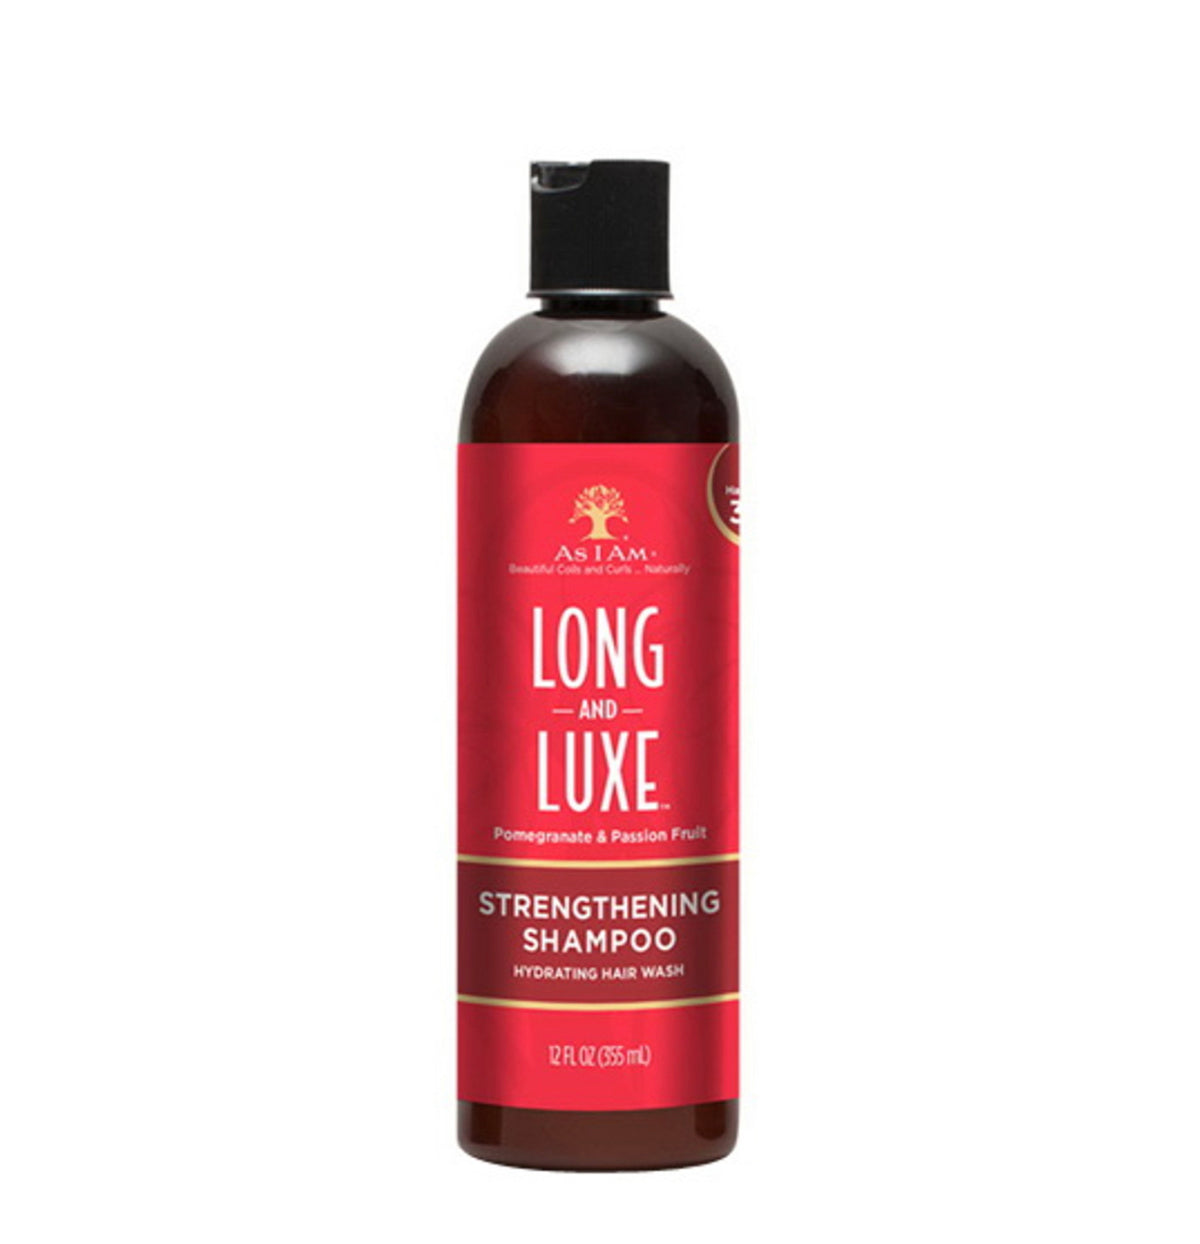 As I Am Long Luxe Strengthening Shampoo